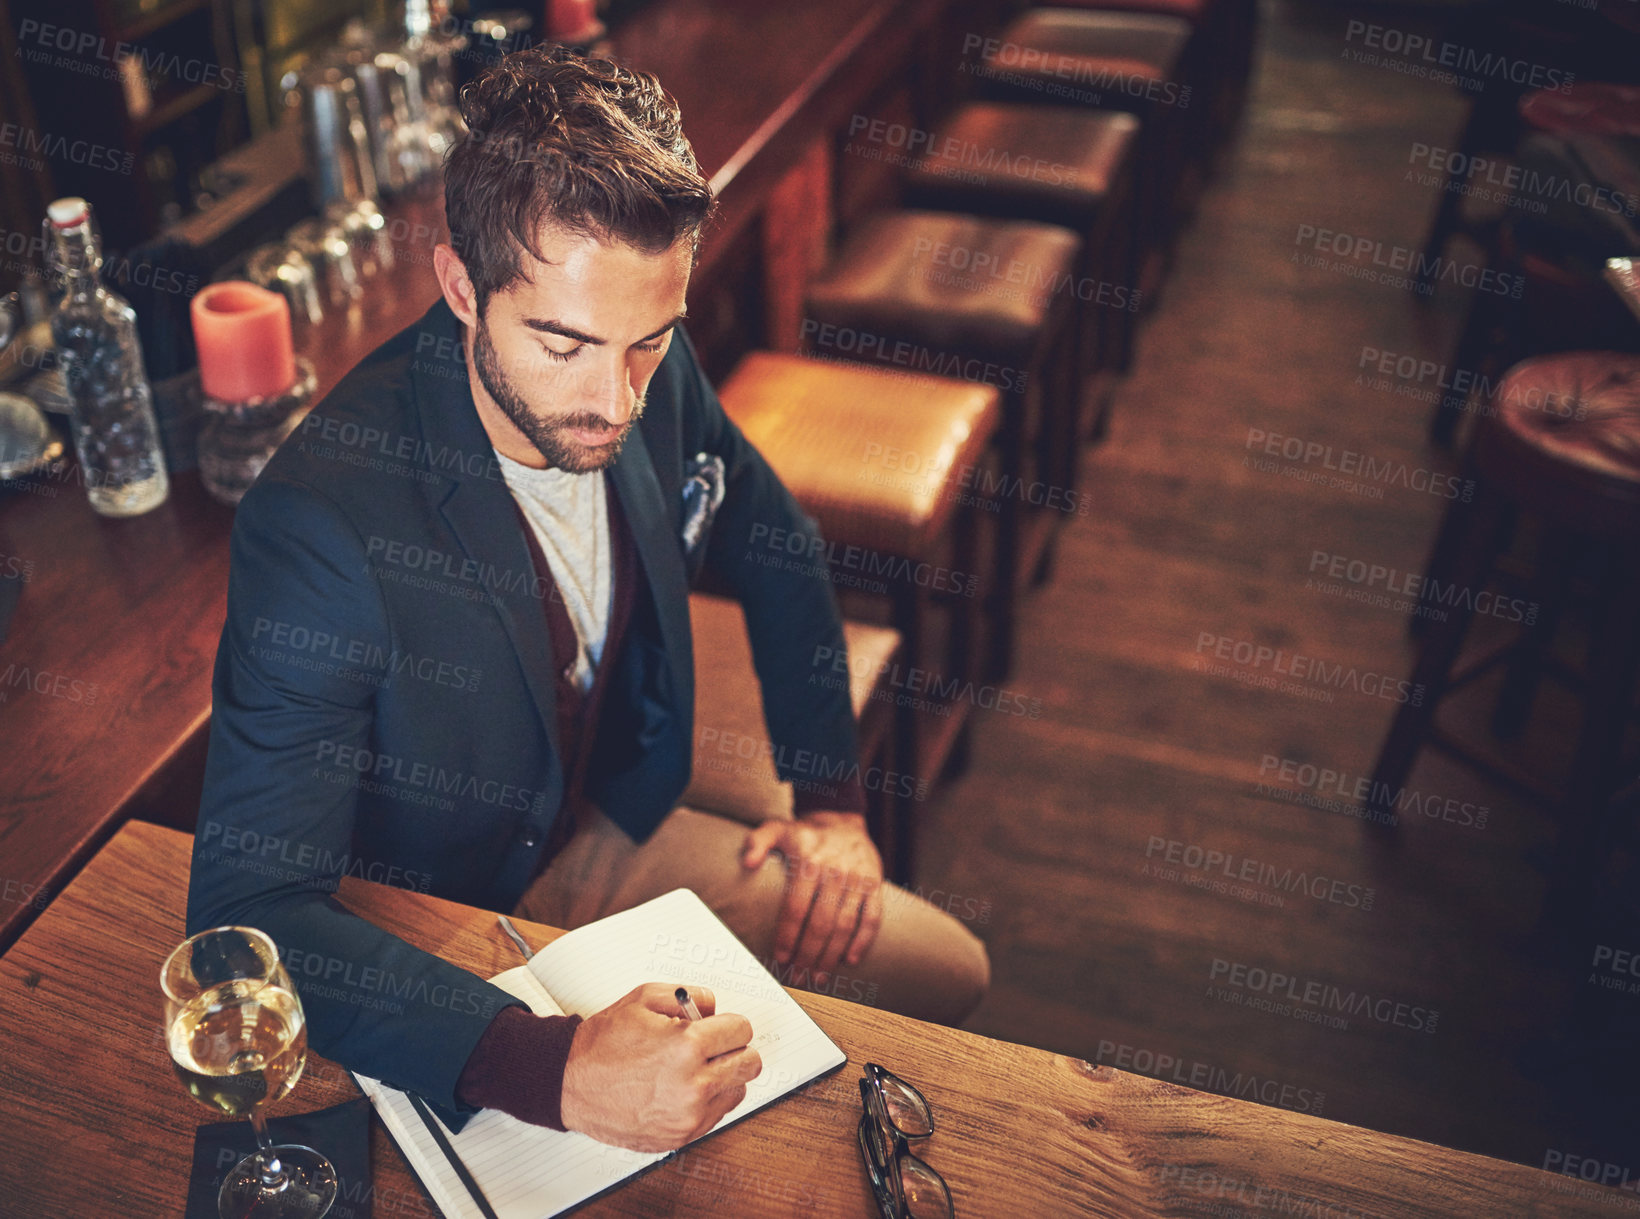 Buy stock photo High angle shot of a young man sitting with his journal in a bar